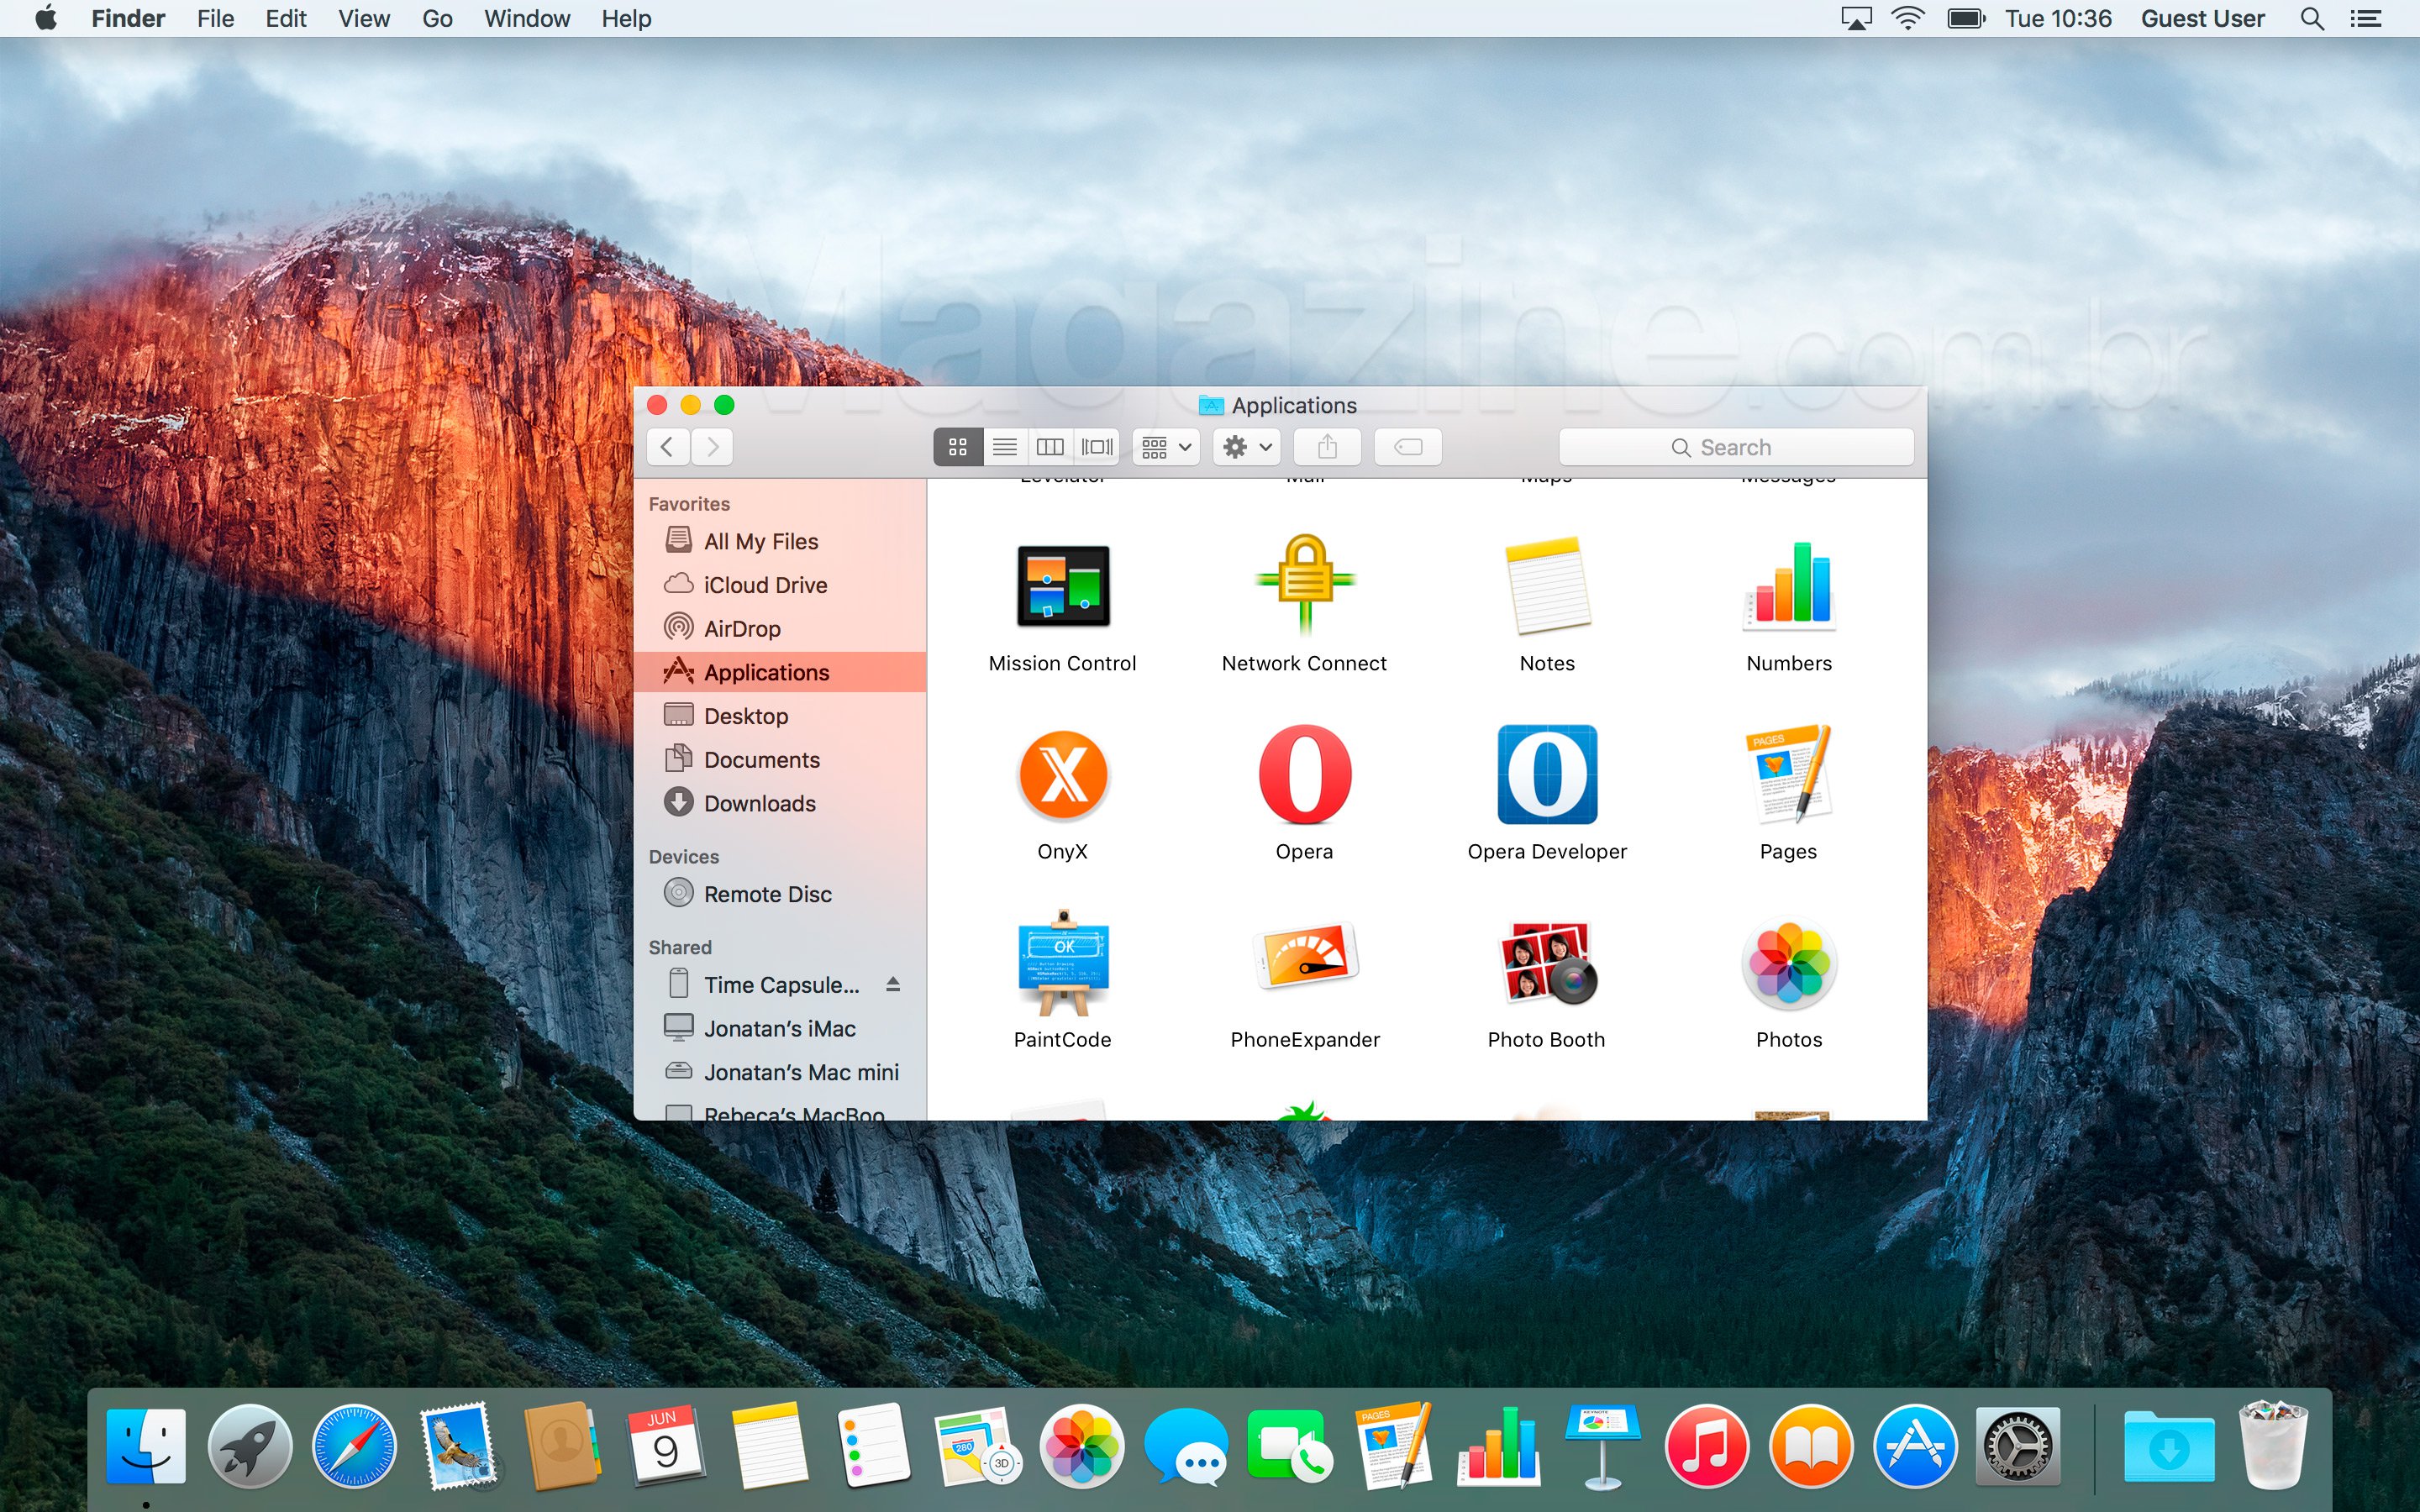 how to download mac os x version 10.10.0